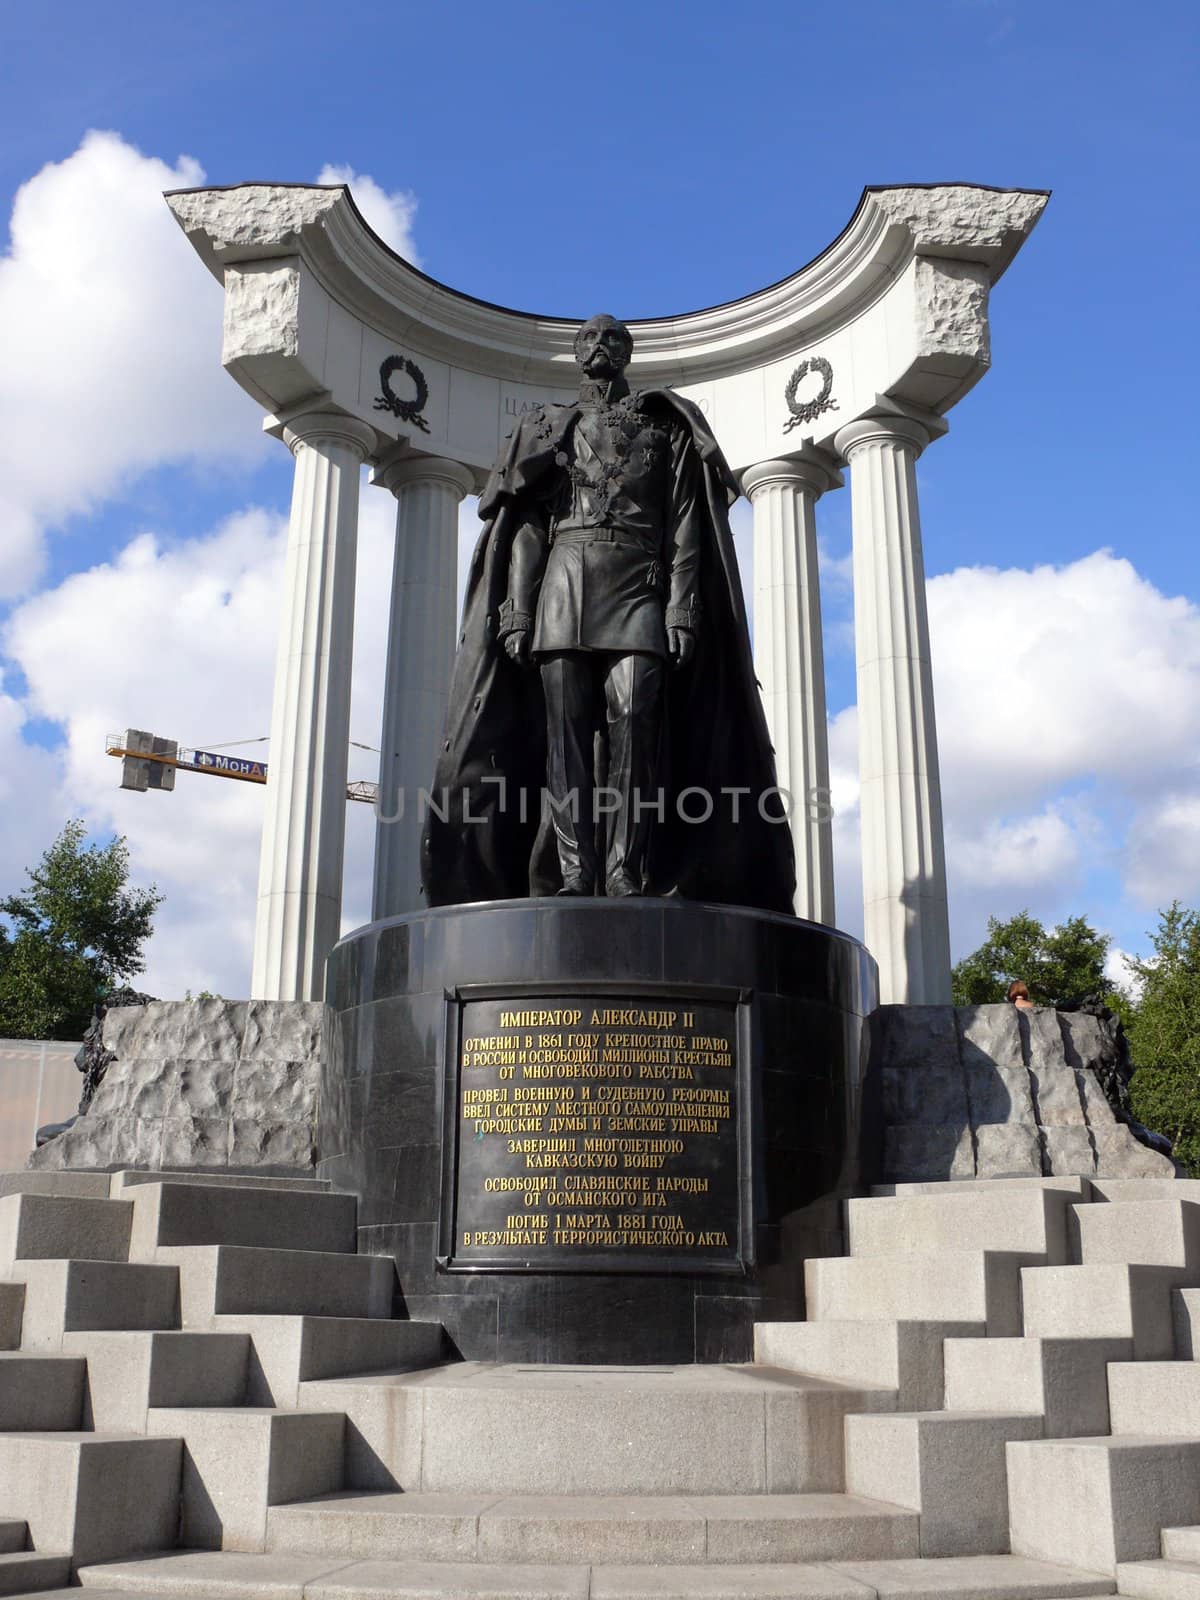 Monument of Alexander the great - Moscow, Russia by Stoyanov